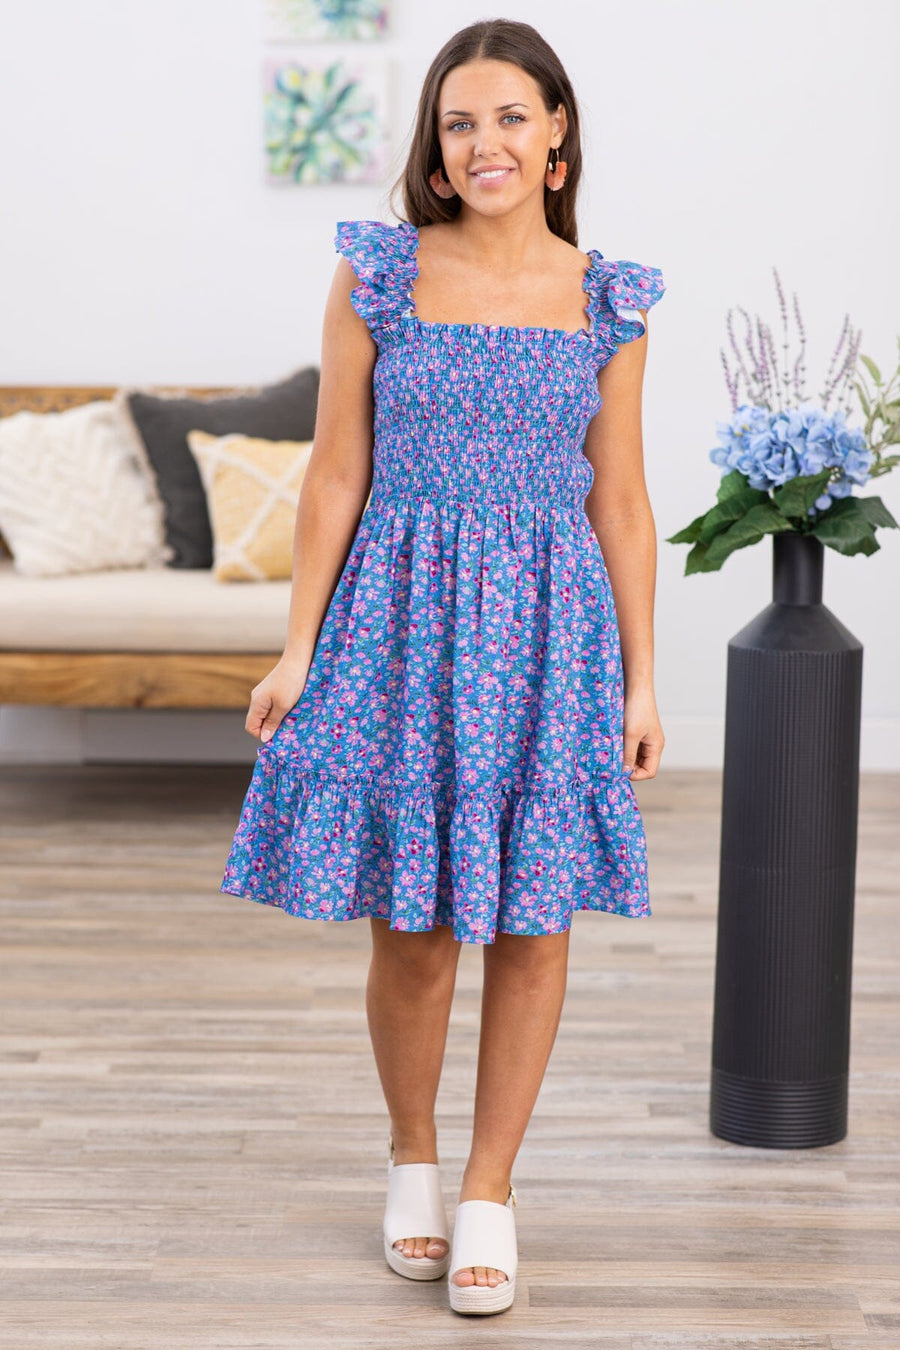 Blue and Lavender Floral Smocked Bodice Dress - Filly Flair